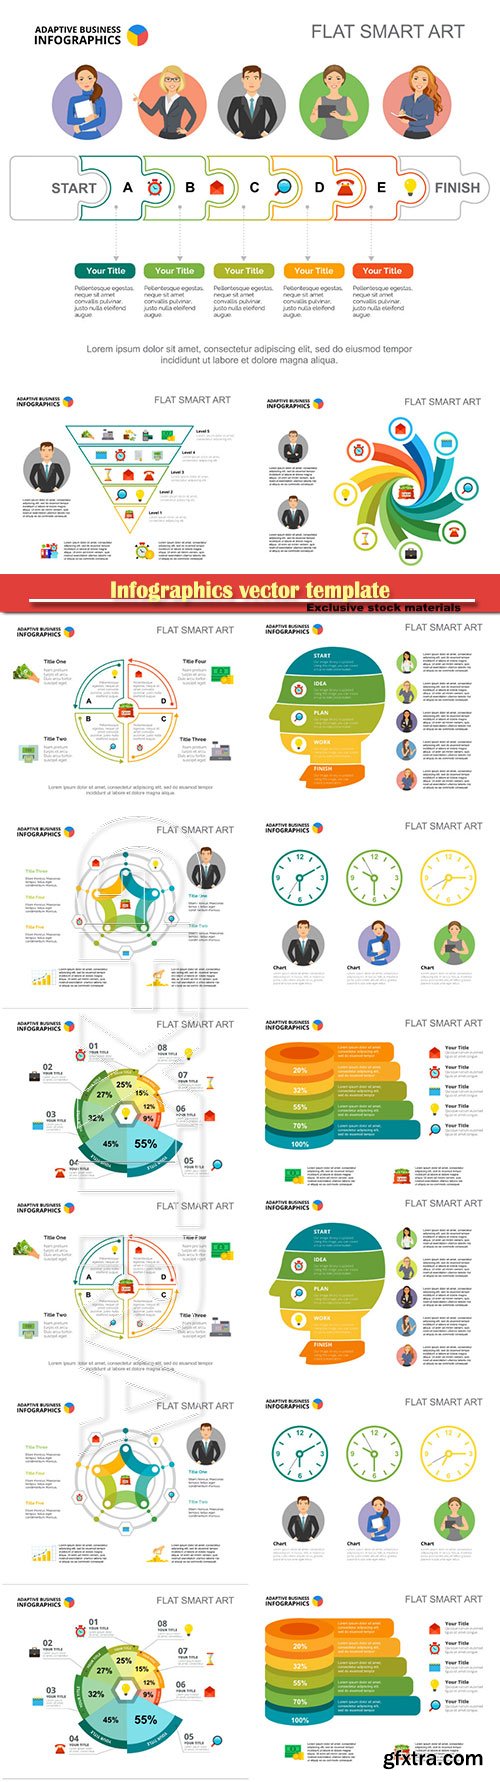 Infographics vector template for business presentations or information banner # 22